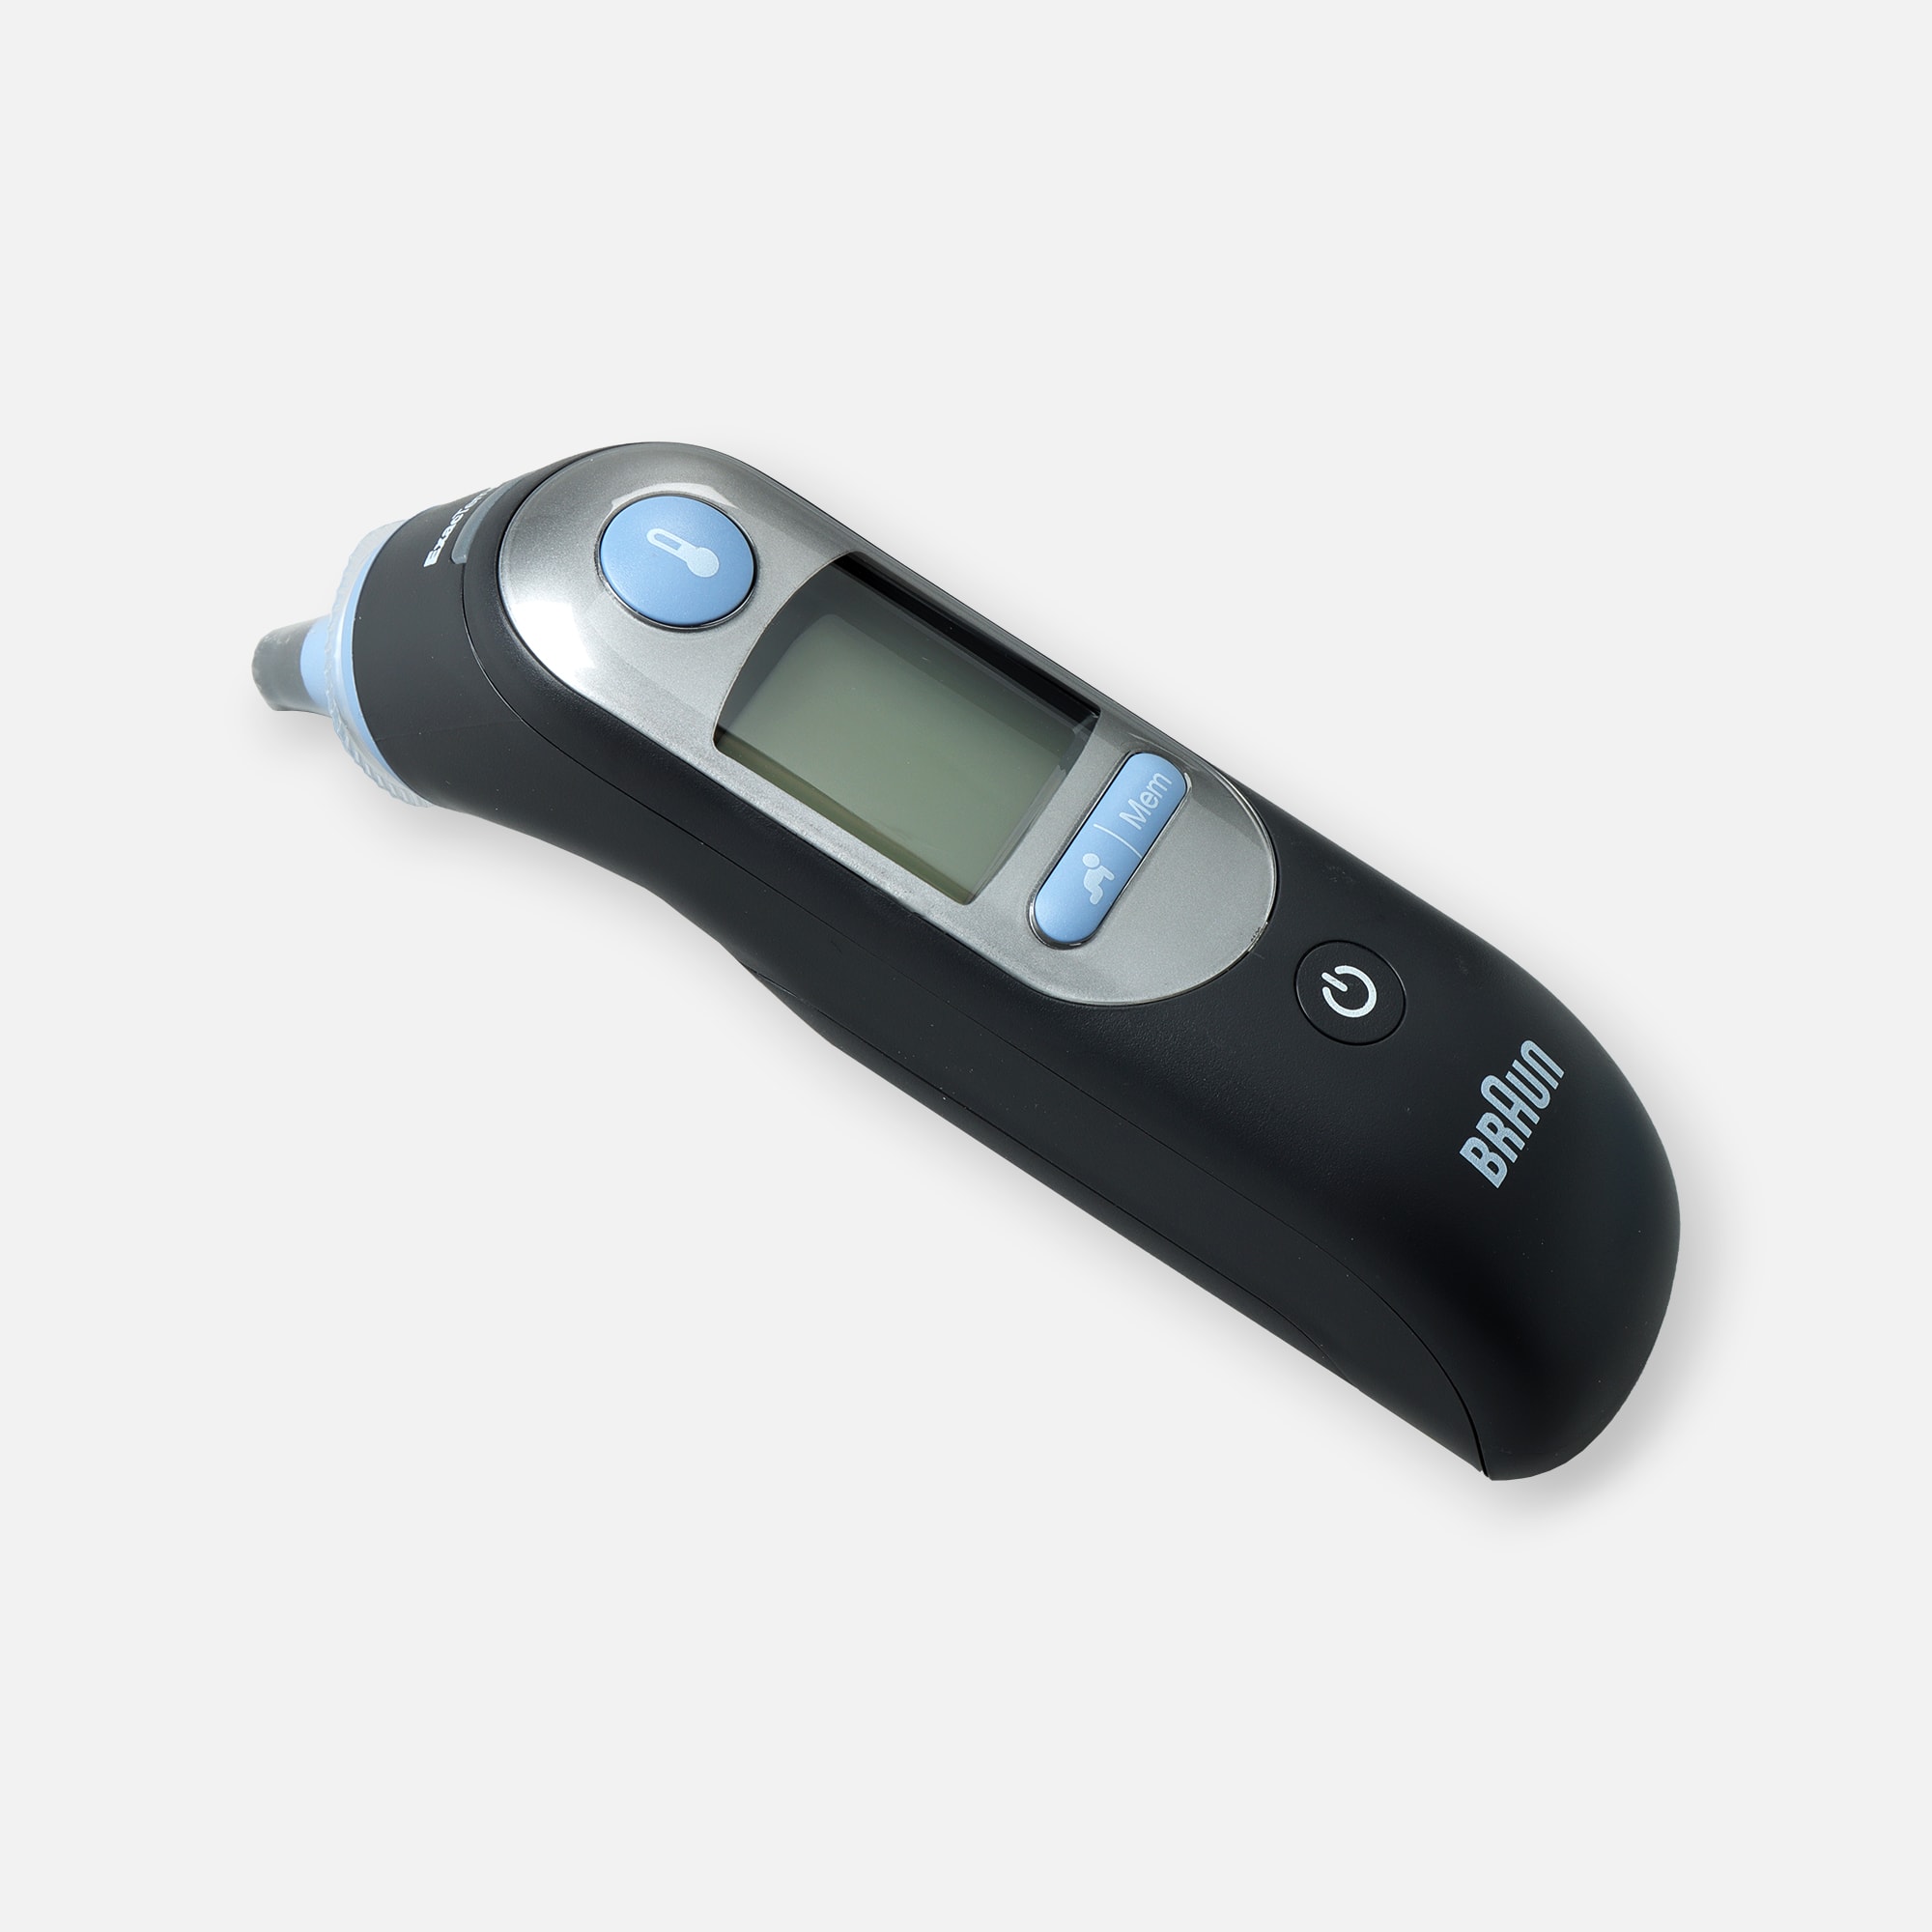 FSA Eligible | Braun Thermo Scan 7 Ear Thermometer